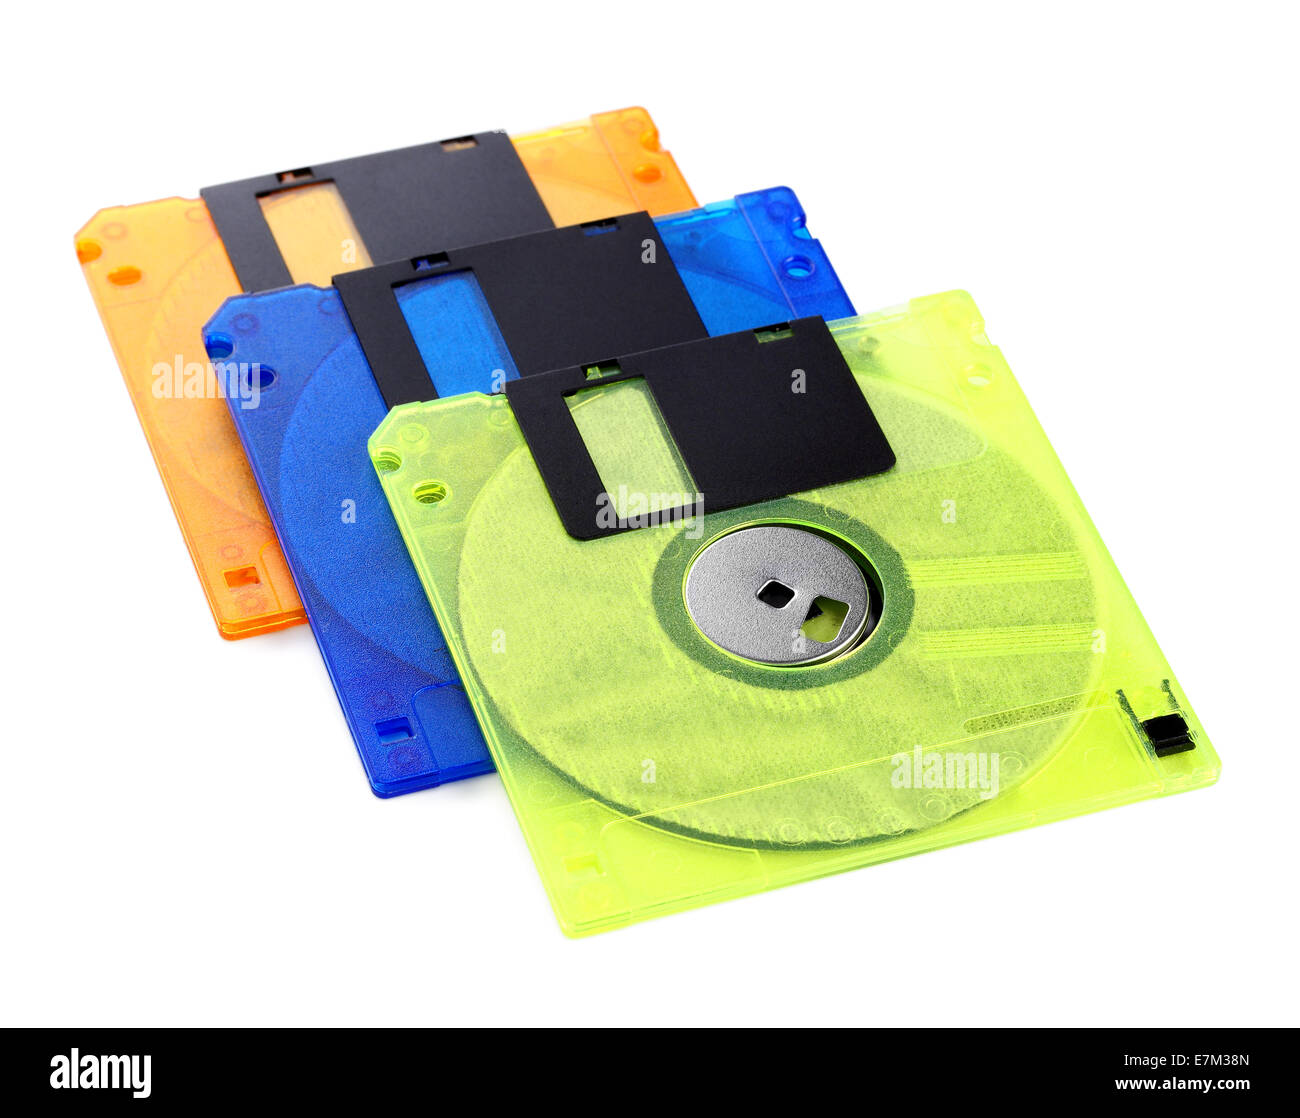 Floppy disks on a white background, close-up Stock Photo